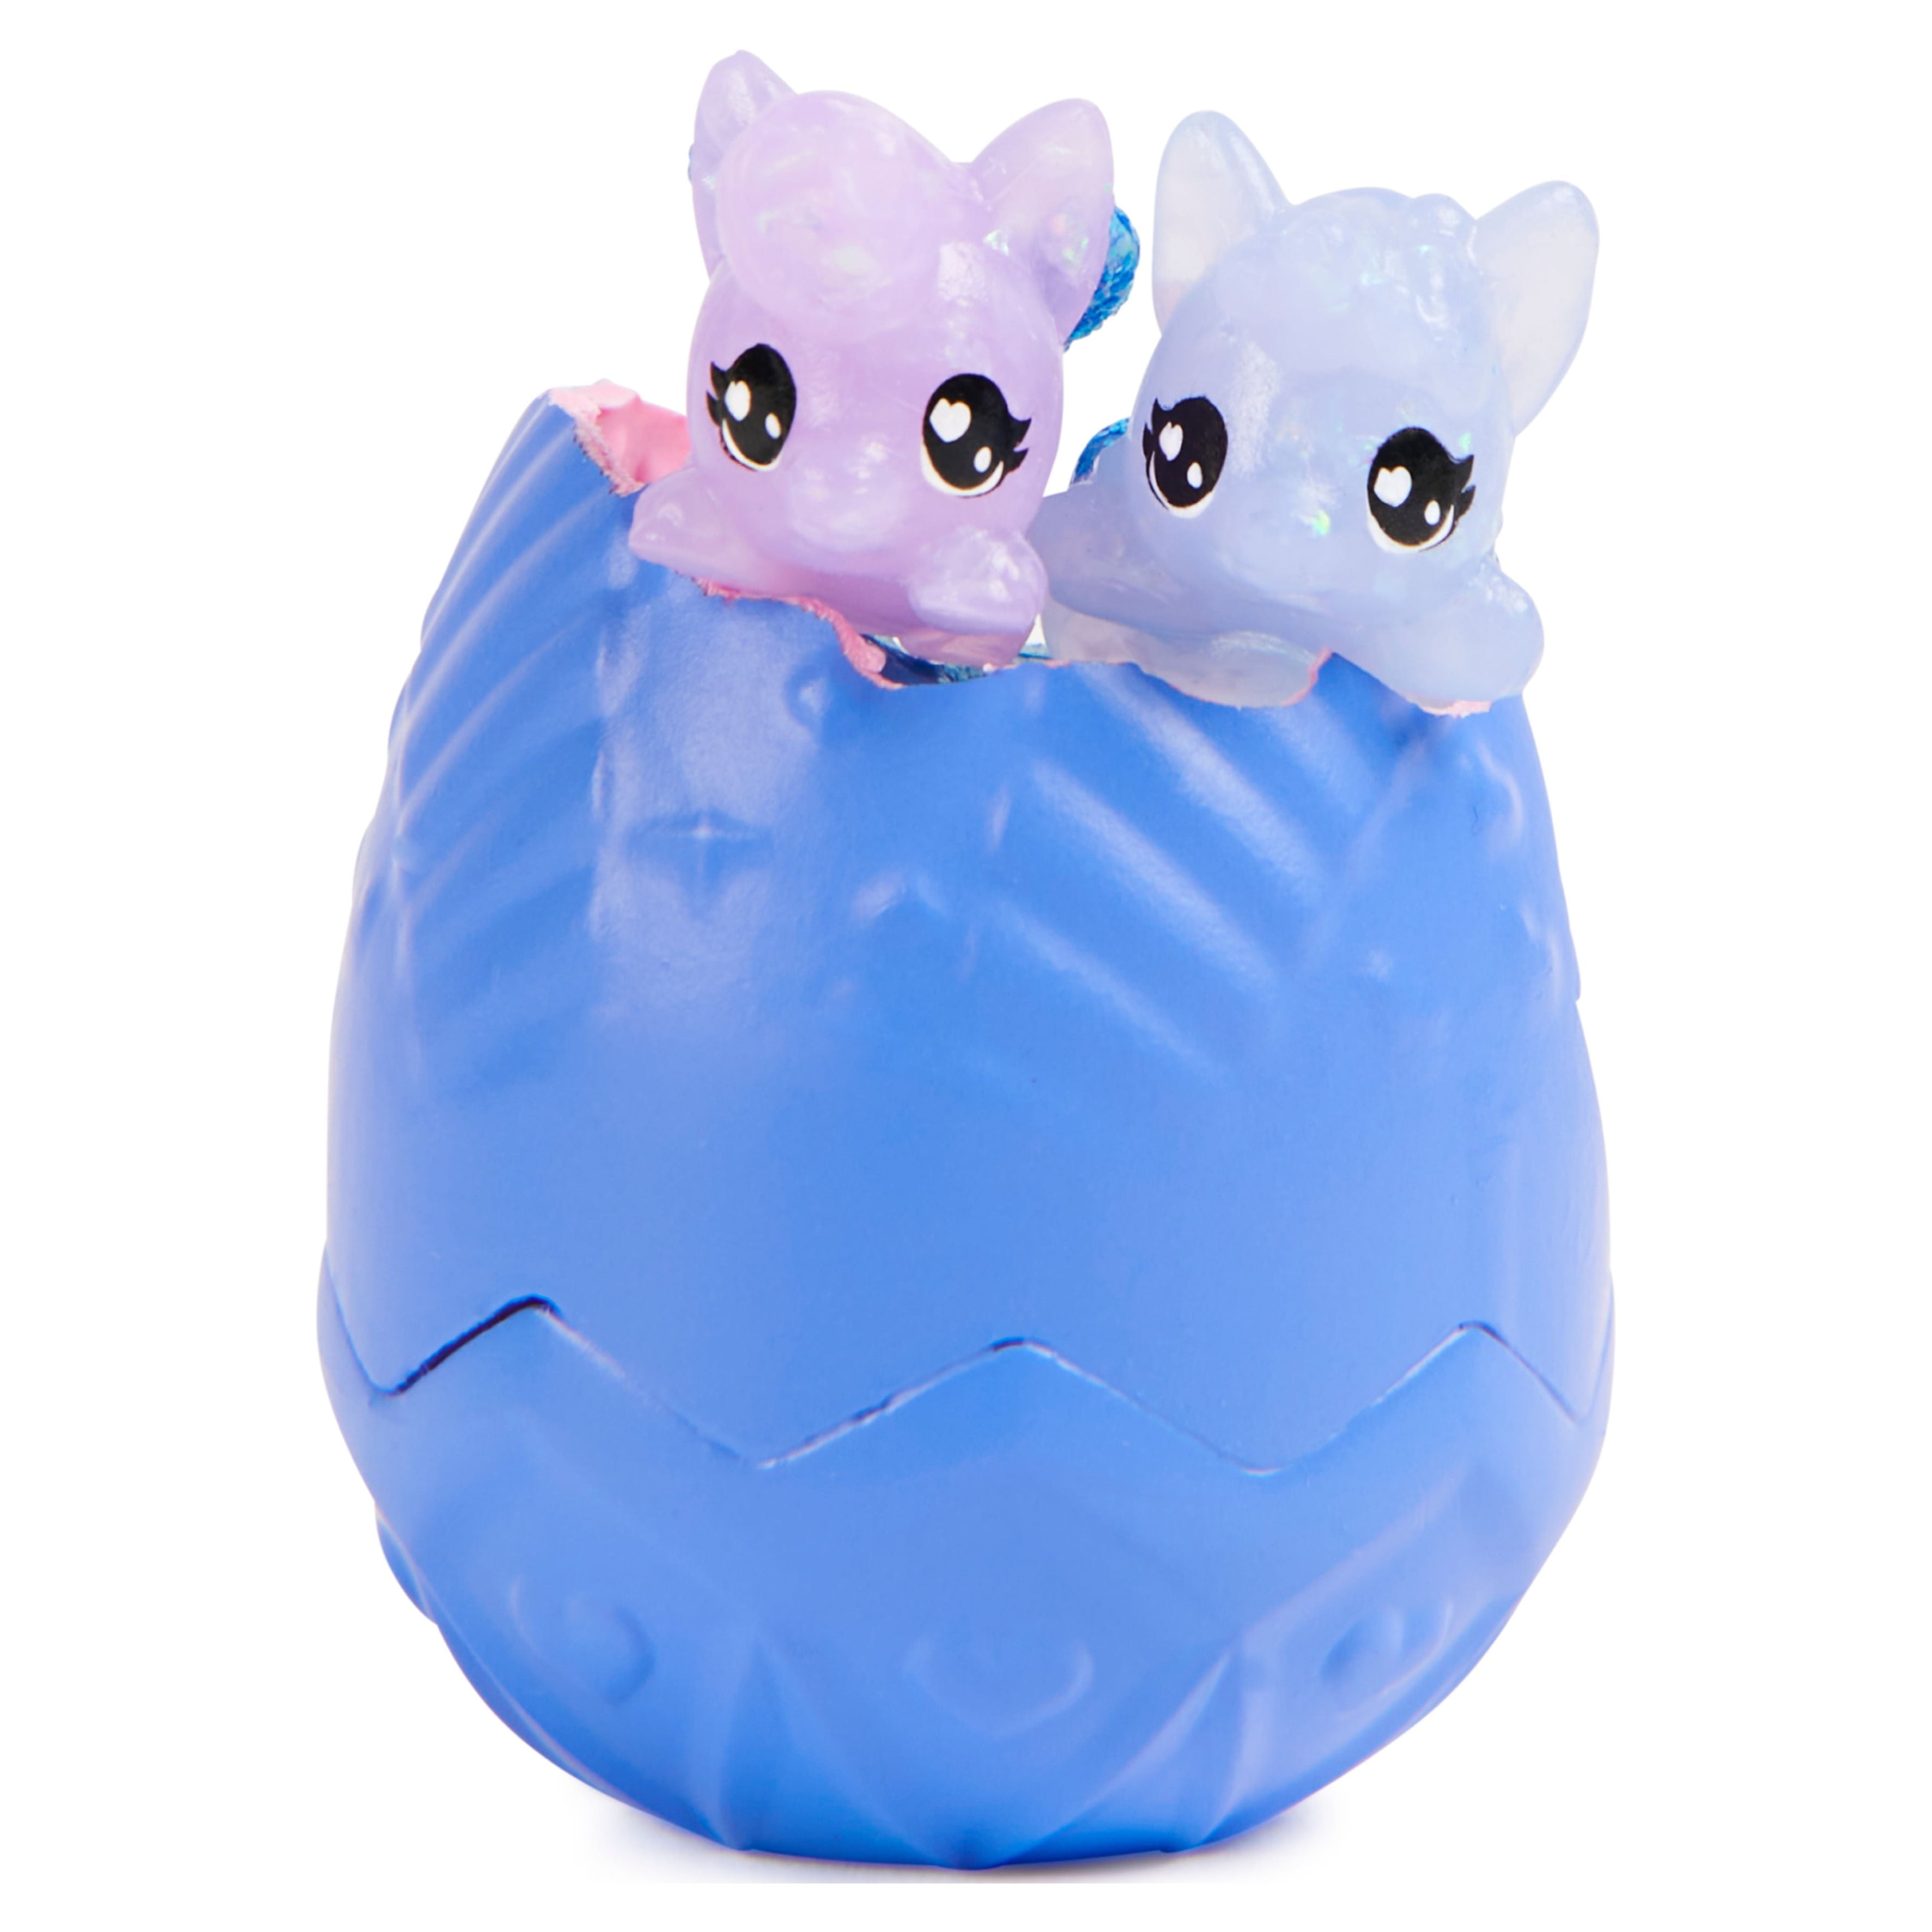  Hatchimals CollEGGtibles, Secret Surprise Playset with 3  (Styles May Vary), Girl Toys, Girls Gifts for Ages 5 and up : Toys & Games